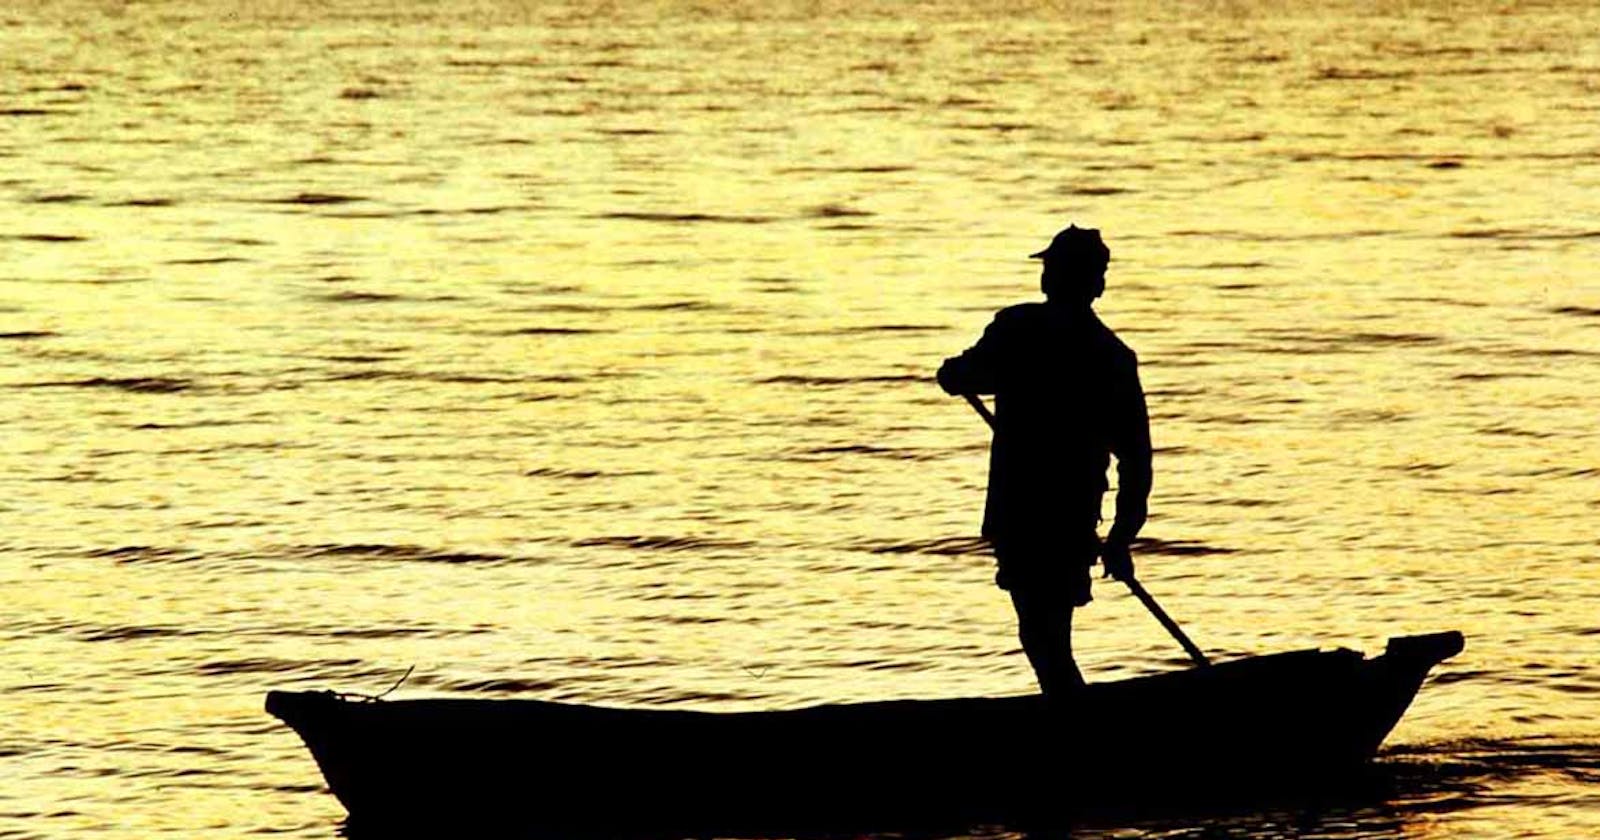 The Mexican Fisherman's Story